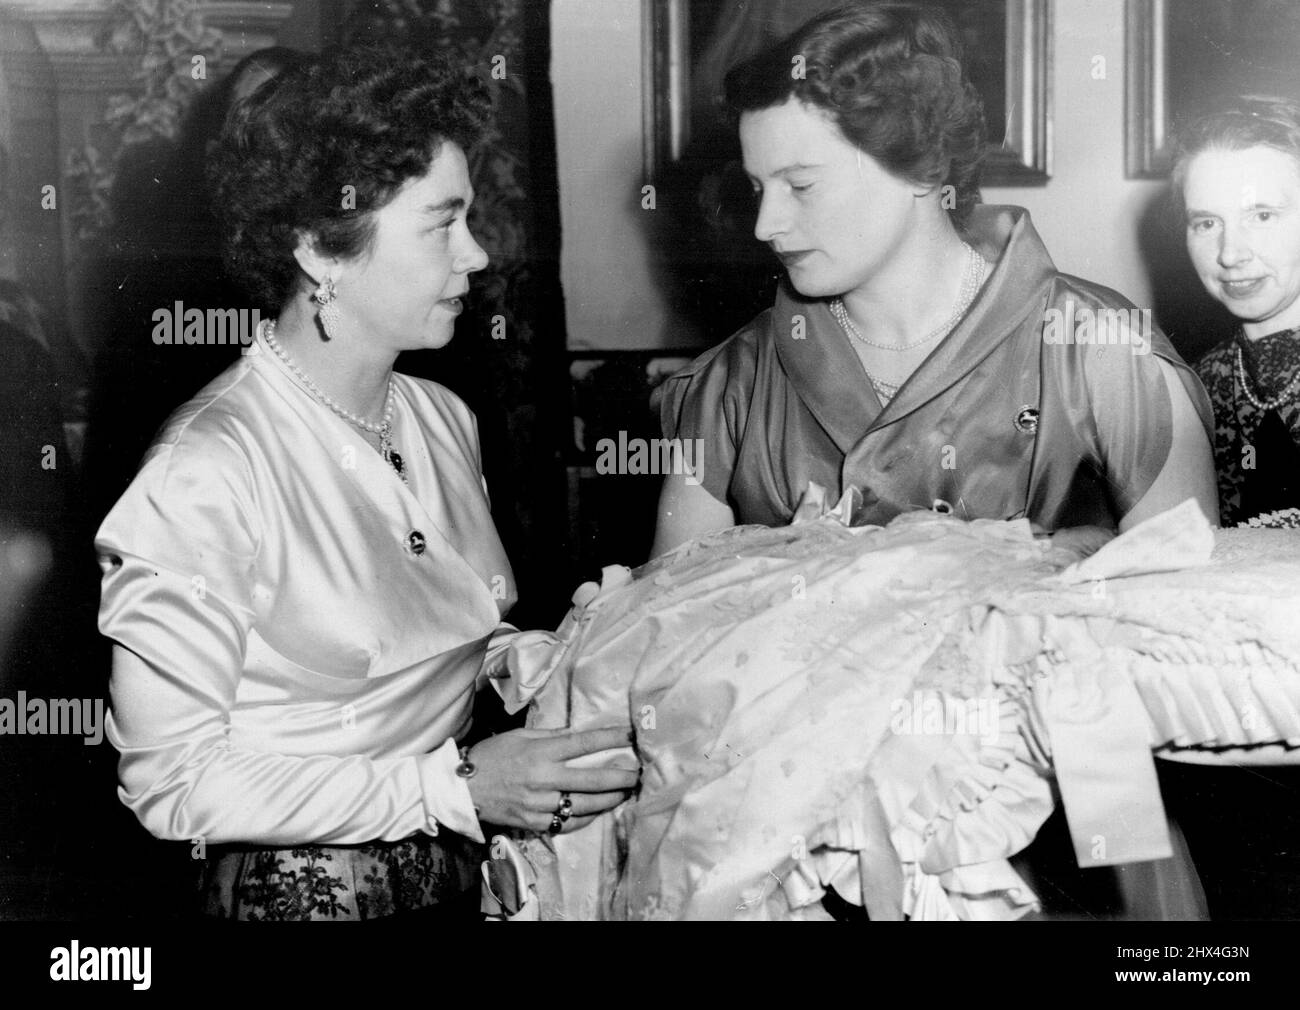 Queen Of Greece is Godmother - Queen Frederika of Greece (left), with Princess Ortrud of Sonderburg-Gluecksburg, who is holding her six-weeks-old daughter, Princess Frederika Louise, who was Christened at Marienburg Castle, residence of the Duke of Brunswick, the father of Queen Frederika and of Prince Ernst August Of Hanover, father of the child. Queen Frederika who was last in Germany in the Autumn of 1951 at the wedding of her brother, Prince Ernst August to Princess Ortrud, was the child's godmother. January 8, 1953. Stock Photo